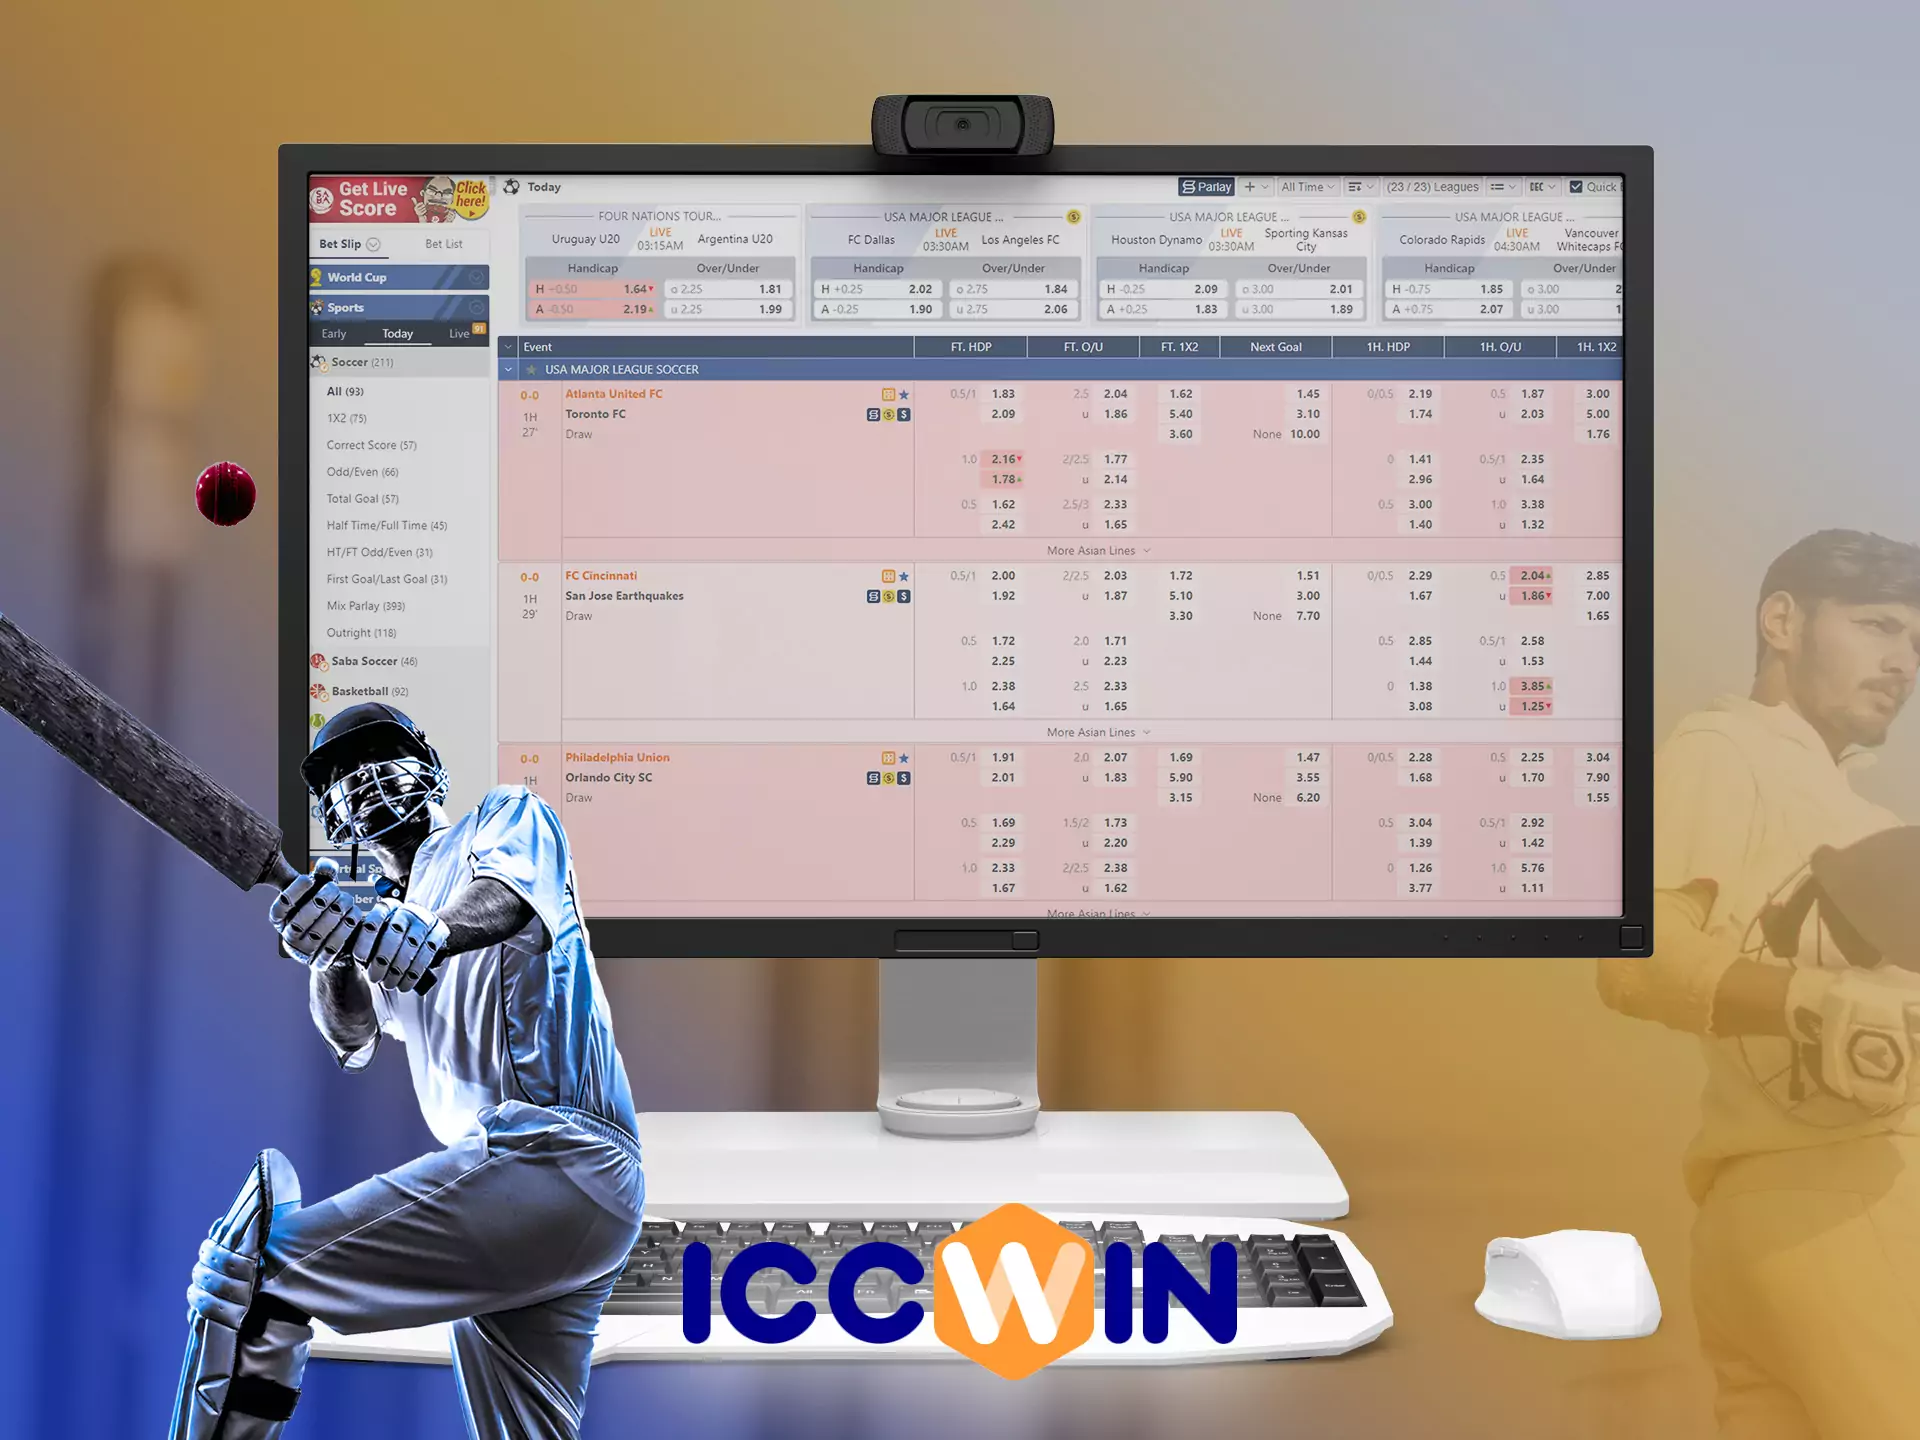 The ICCWin website has a simple design, a wide range of events and high odds.